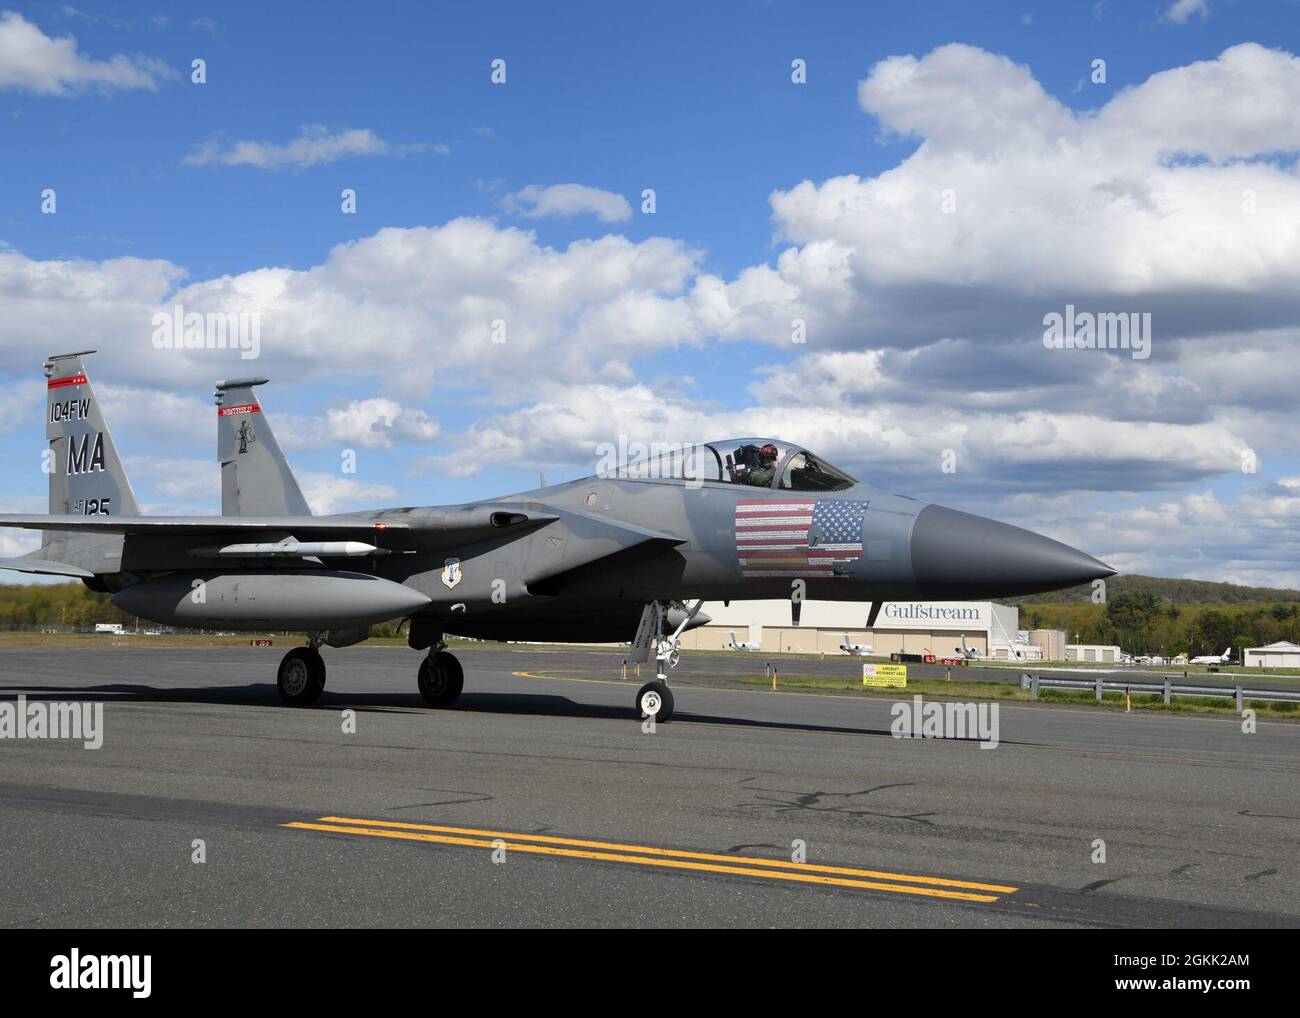 Aircraft 85-125 is the first F-15C  Eagle at the 104th Fighter Wing to hit 10,000 flight hours.  Lt. Col. John 'Rocket' Koegel flew the sortie on May 11, 2021 out of Barnes Air National Guard Base, Westfield Massachusetts that pushed the 'odometer' past 10,000 flight hours. Stock Photo